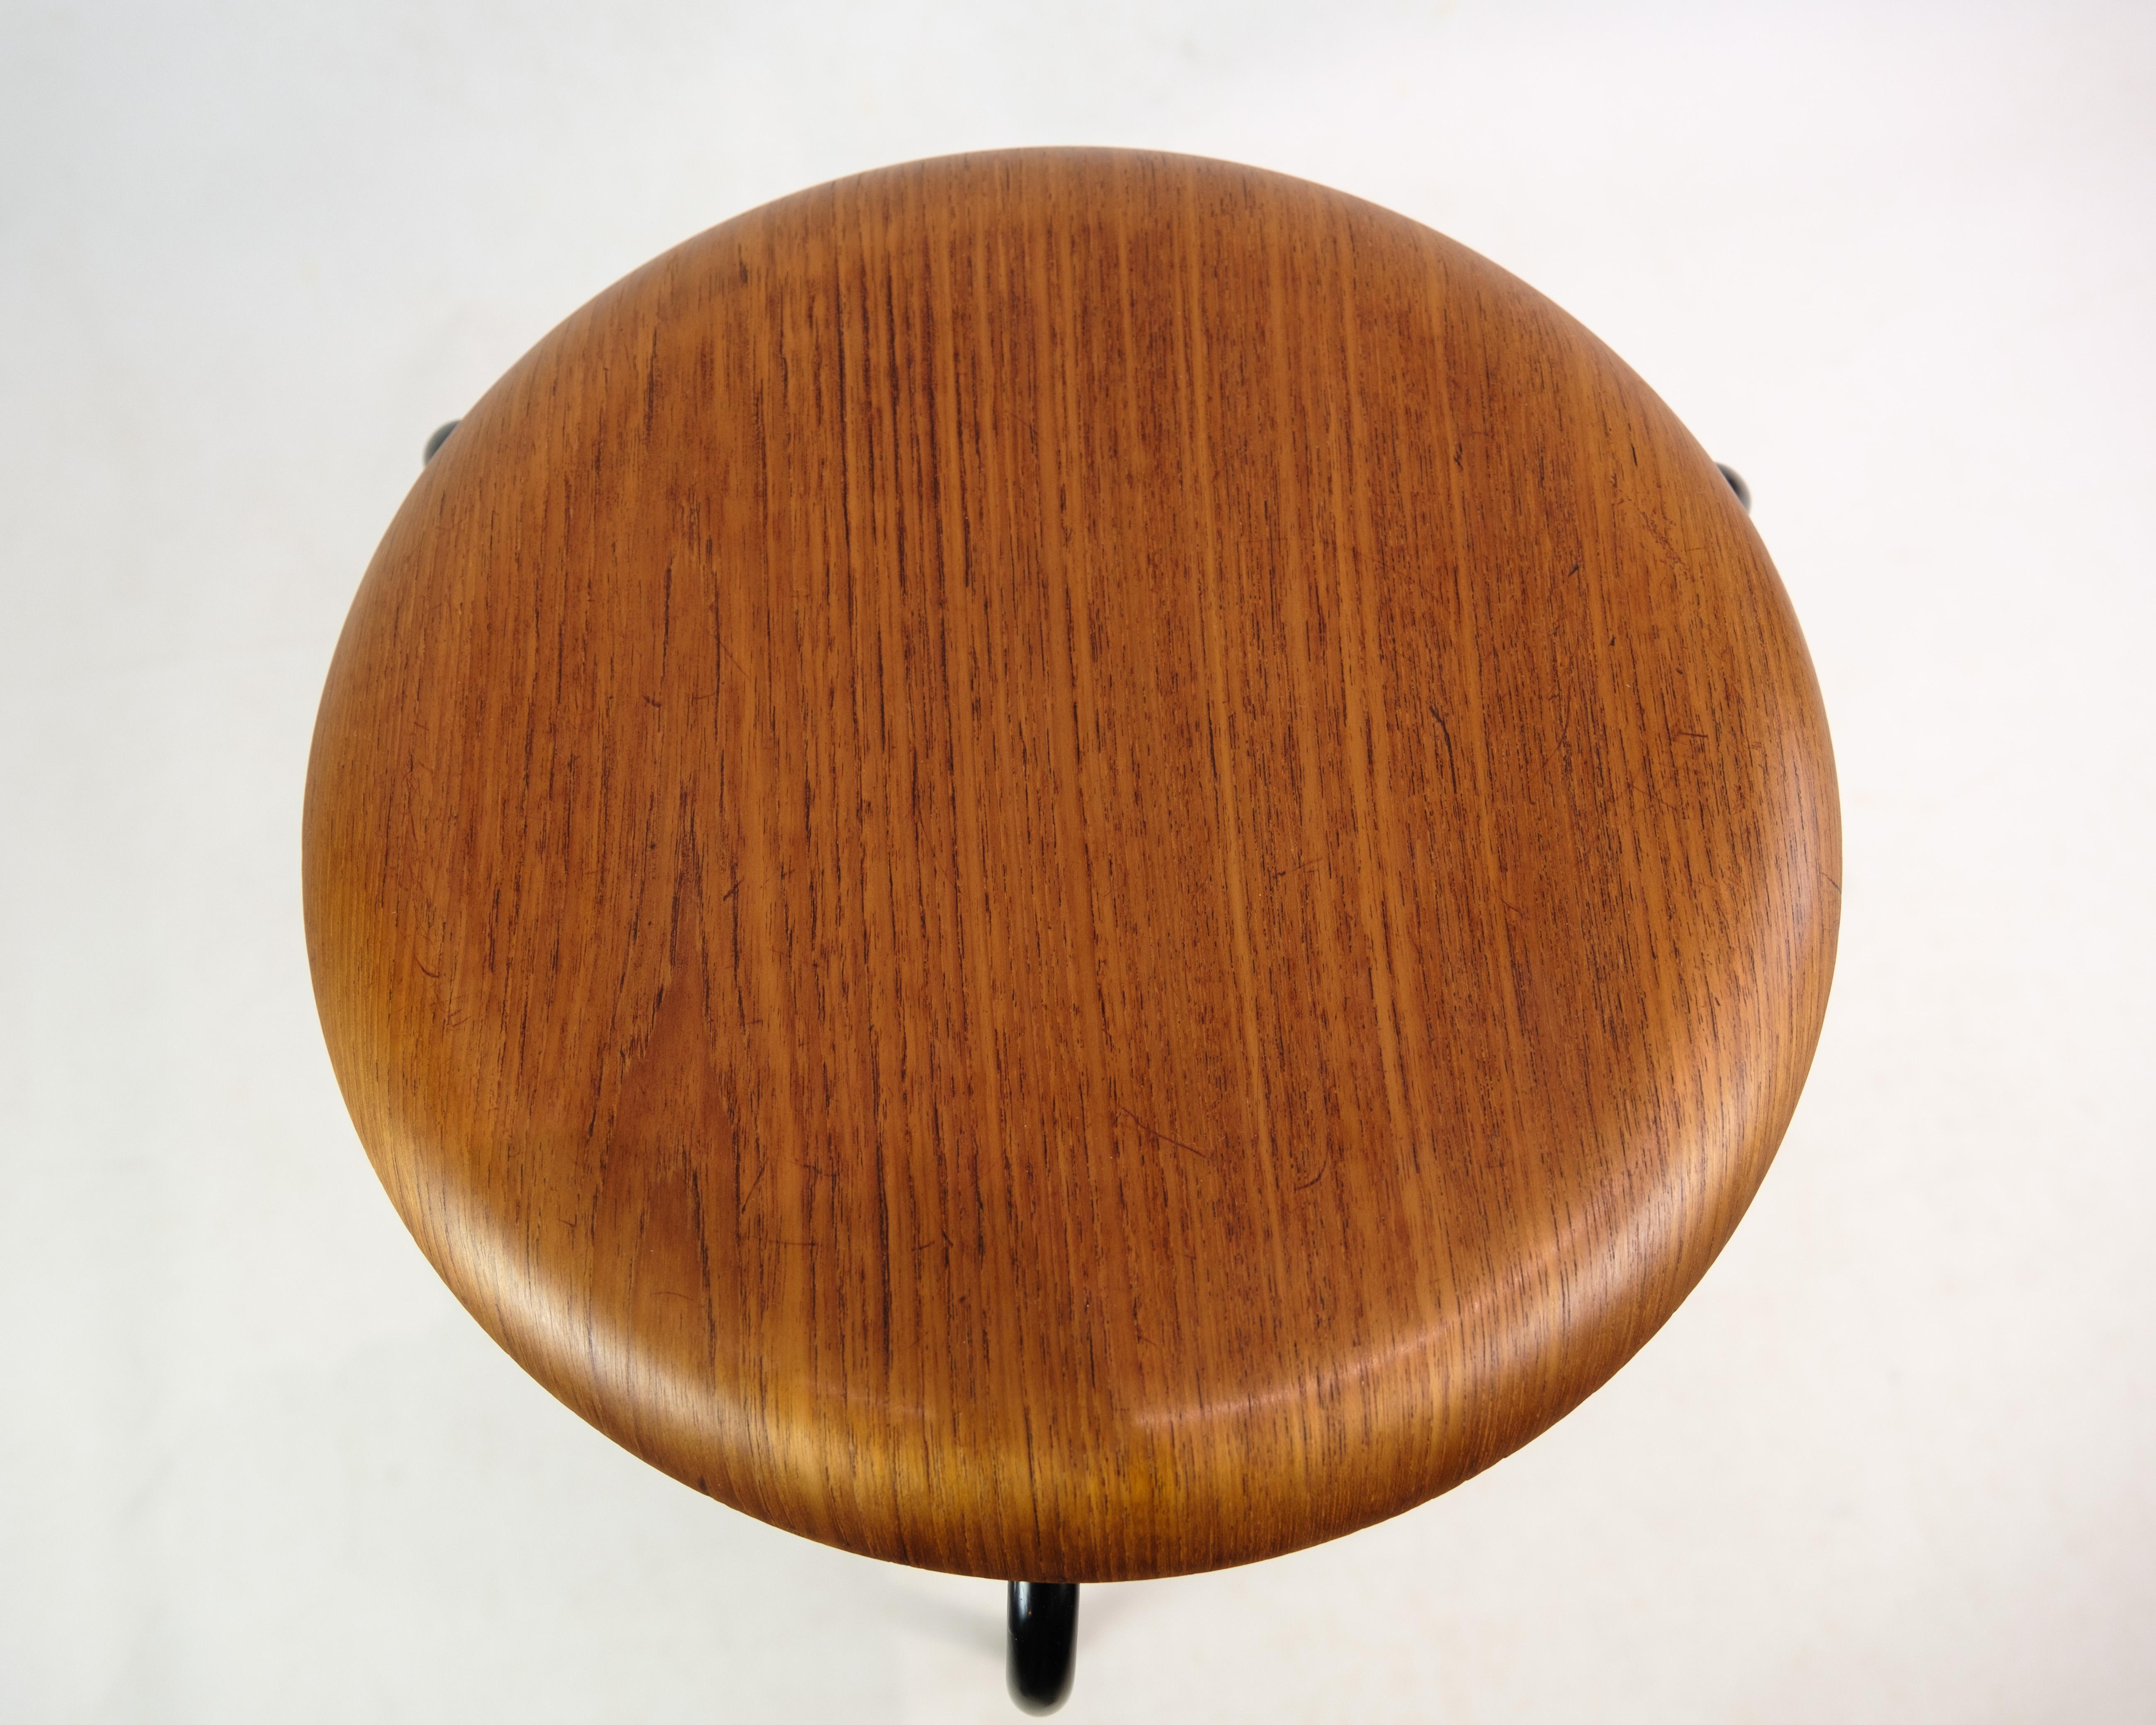 A set of teak stools with a black frame, designed by Arne Jacobsen and manufactured by Fritz Hansen from around the 1950s.

This product will be inspected thoroughly at our professional workshop by our educated employees, who assure the product